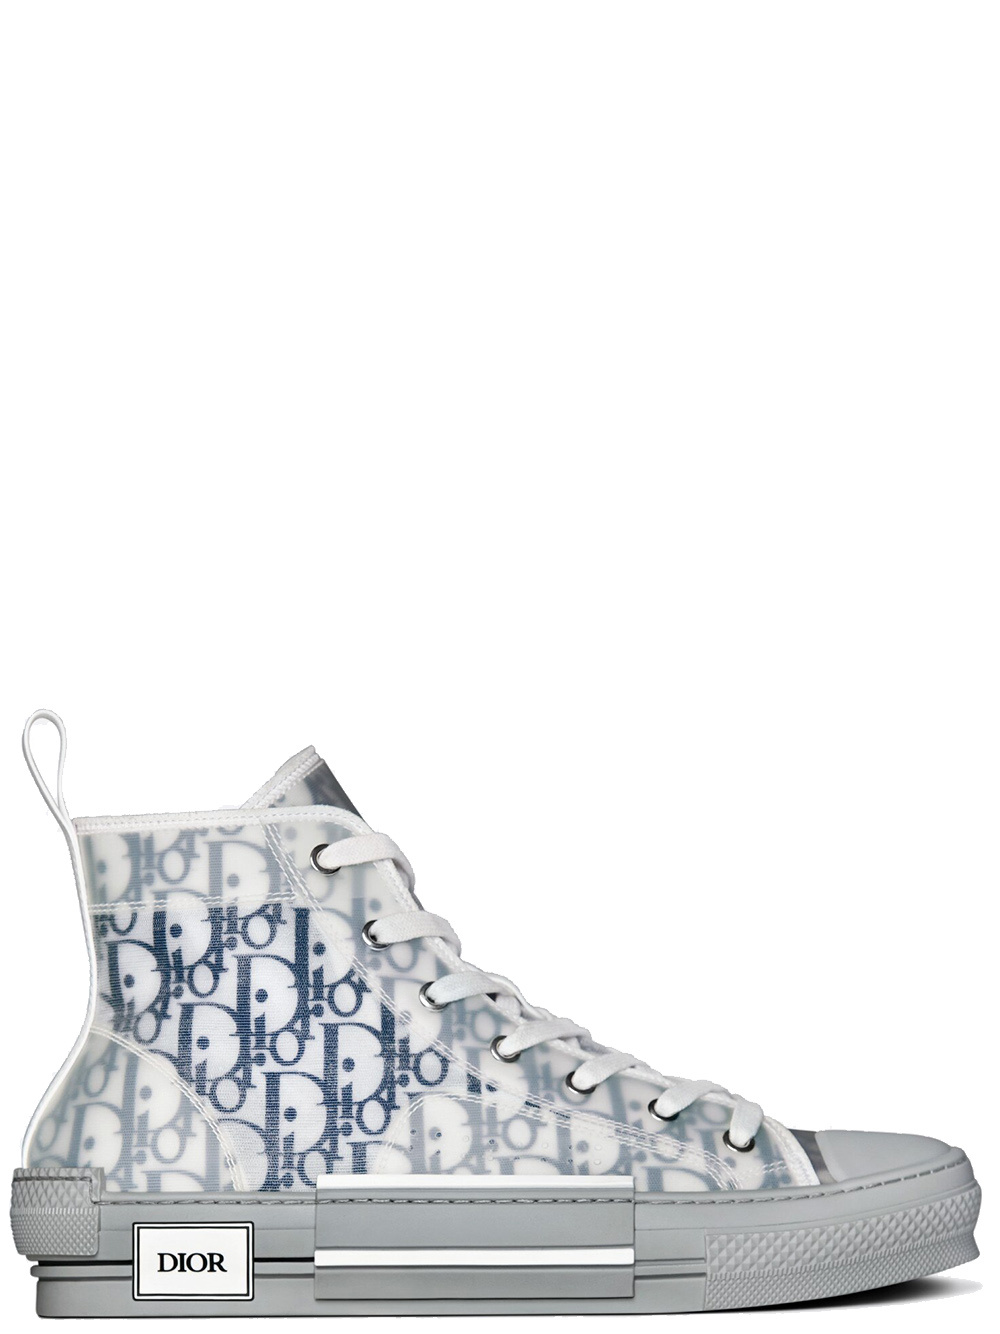 Dior Hightop Knit  Leather Sneaker in Blue  Lyst